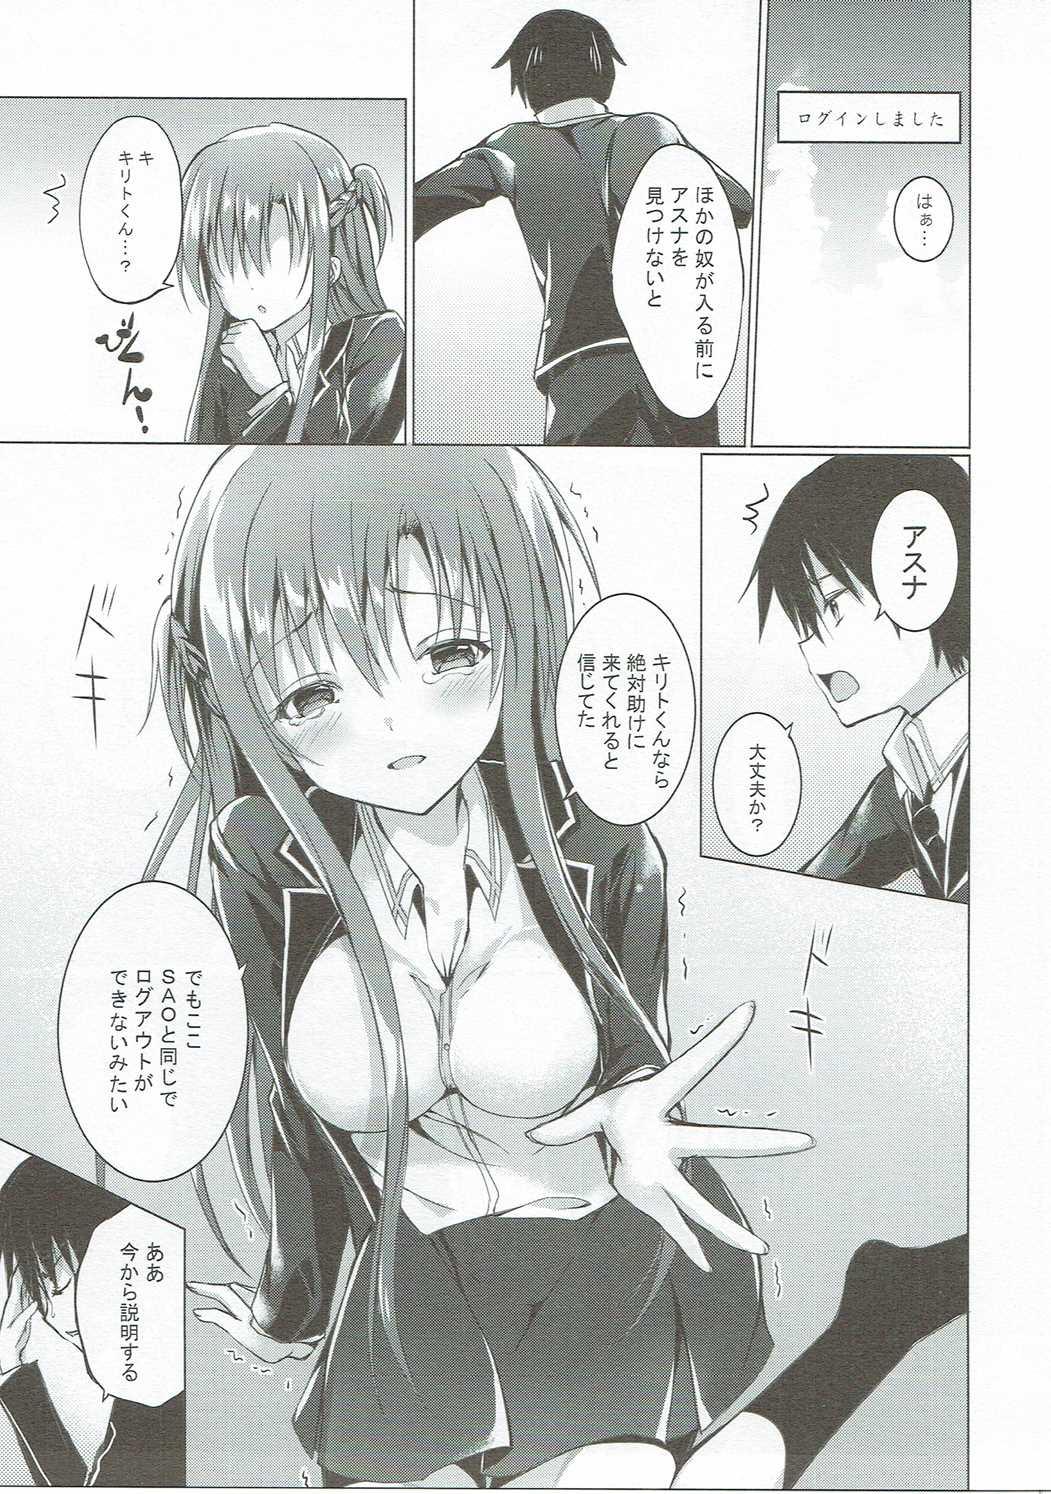 Face Fucking Asuna to VR Game - Sword art online Menage - Page 6